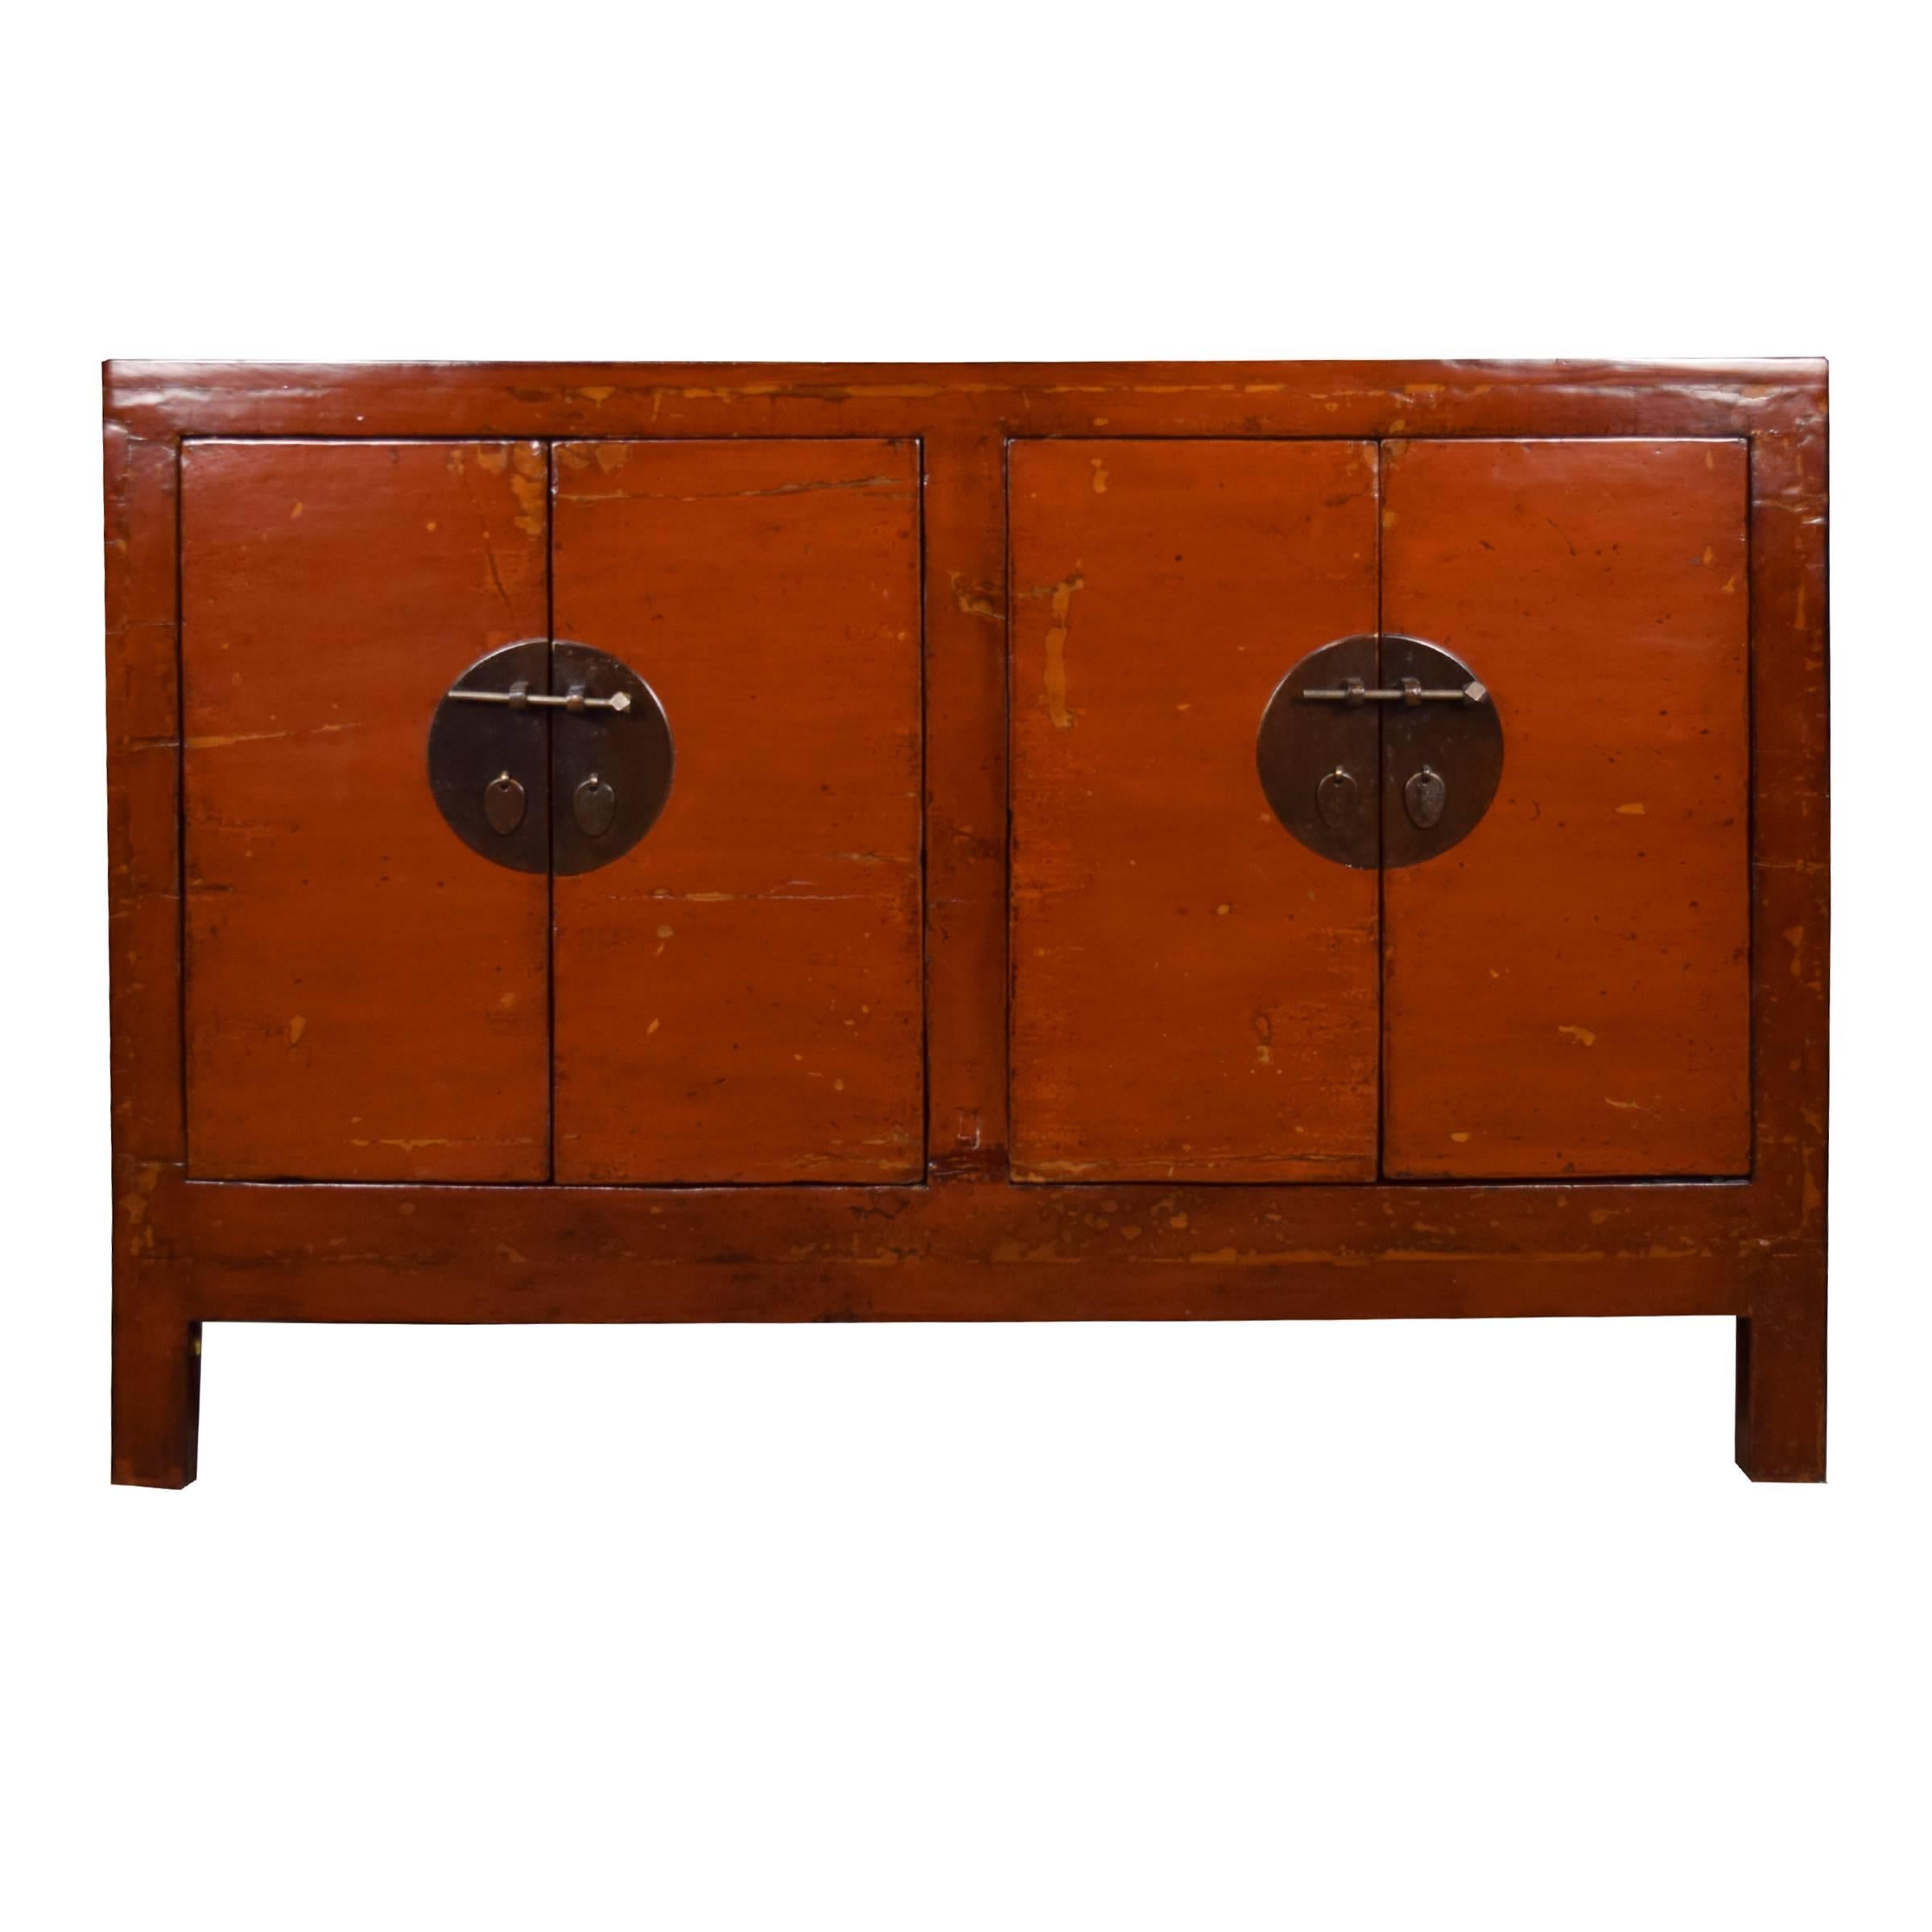 Early 20th Century Chinese Four-Door Red Lacquer Chest